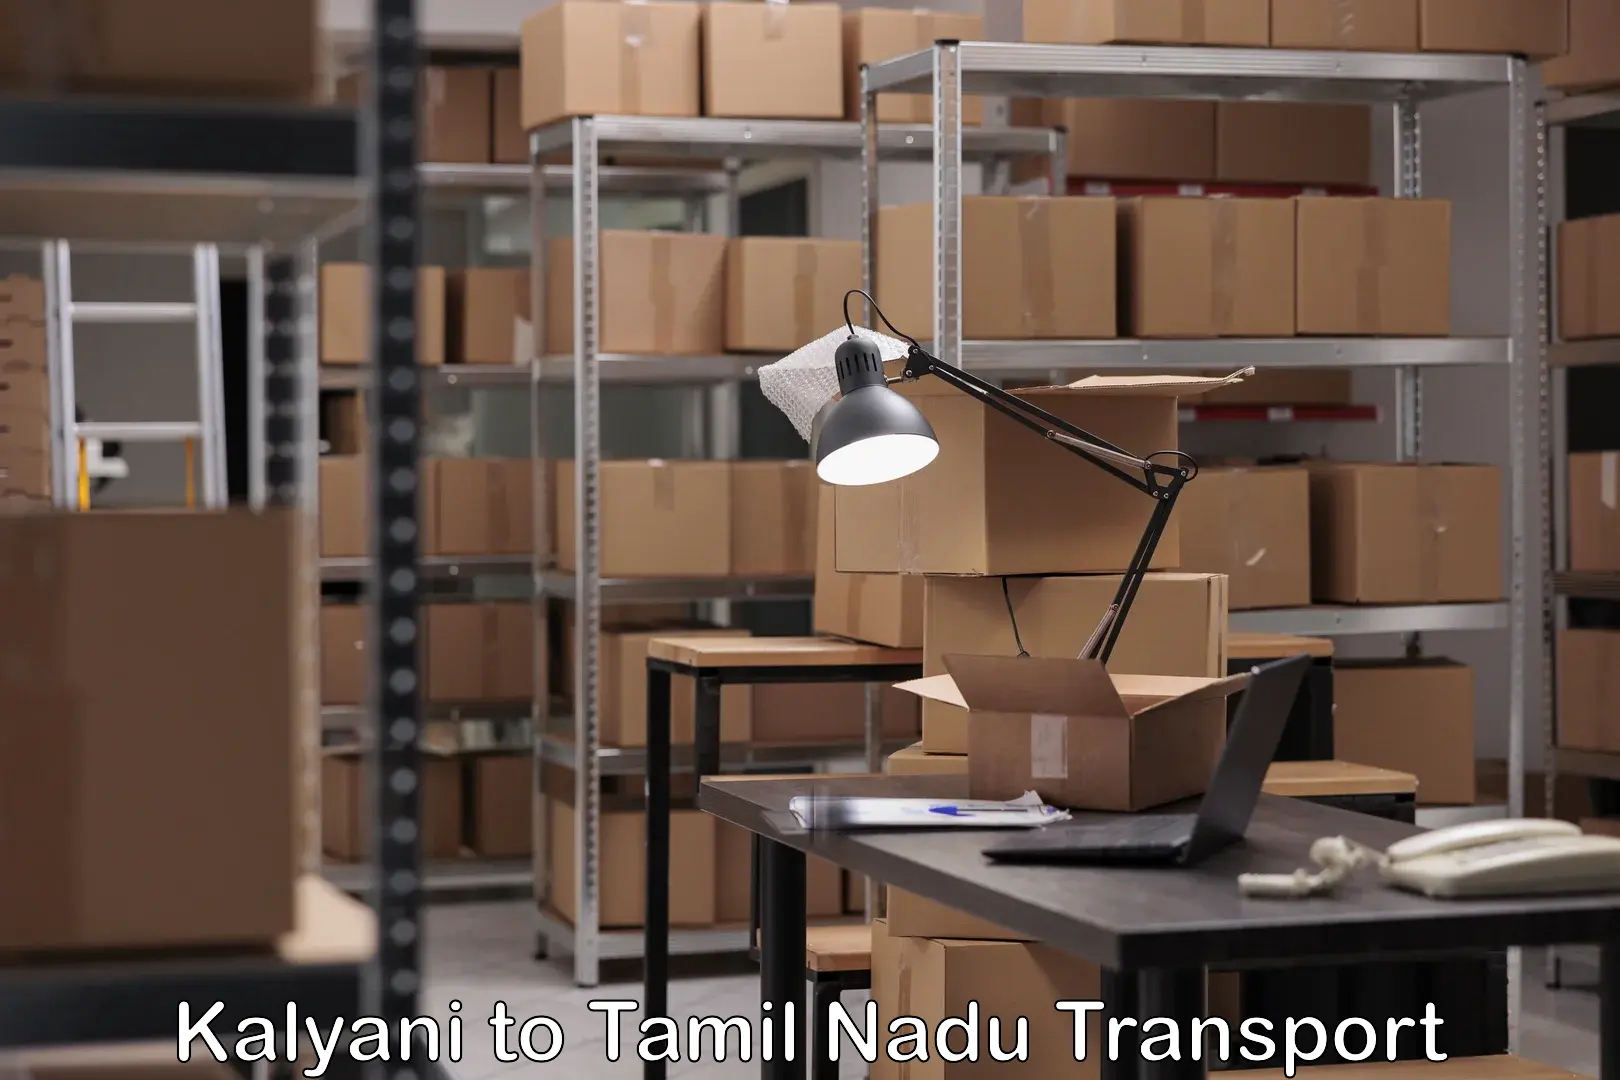 Transport bike from one state to another Kalyani to Erode